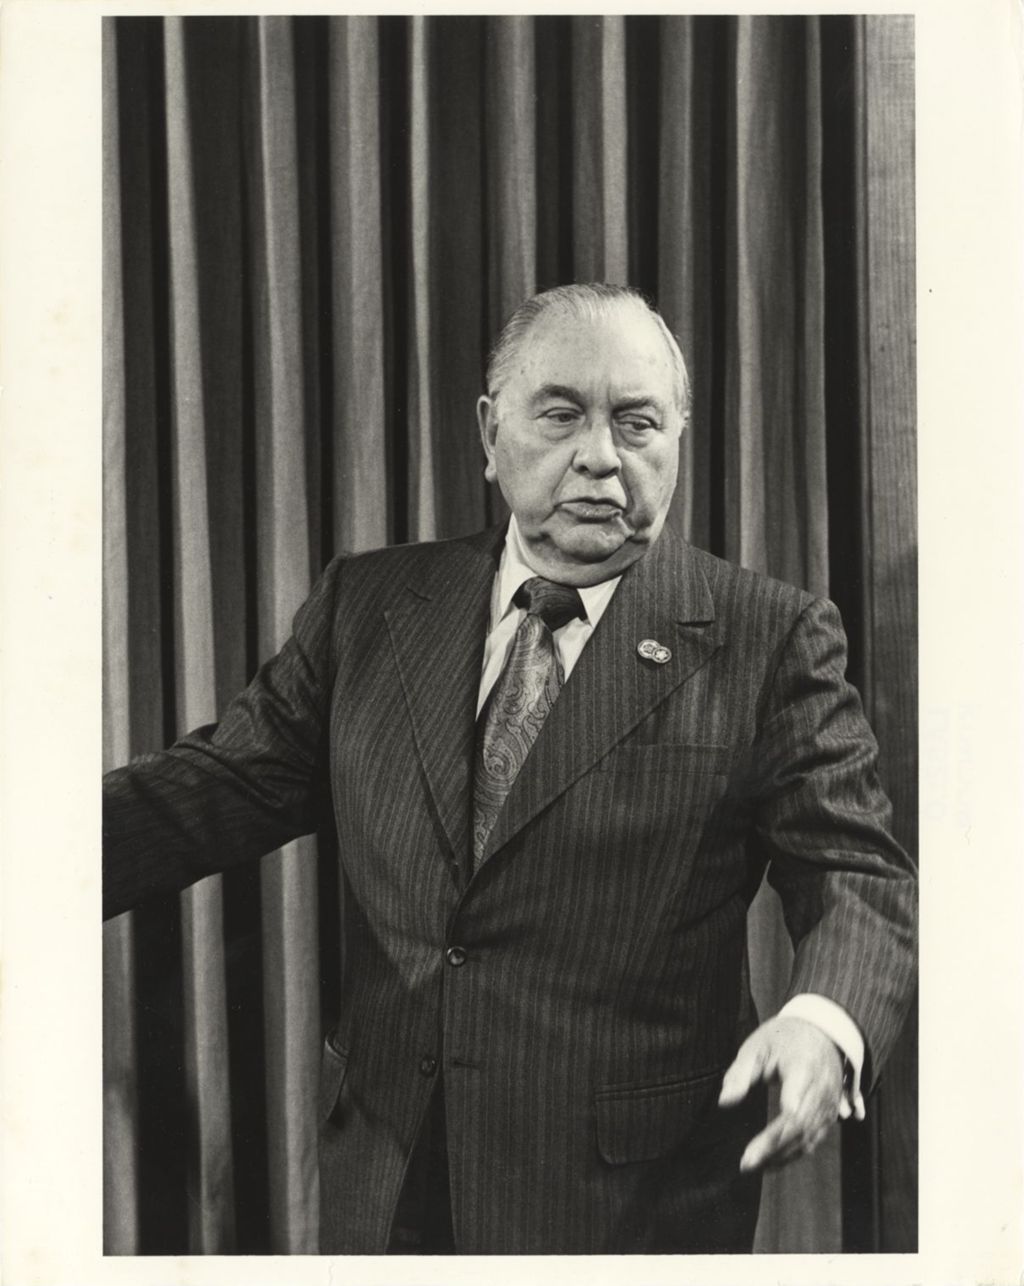 Miniature of Richard J. Daley leads a press conference